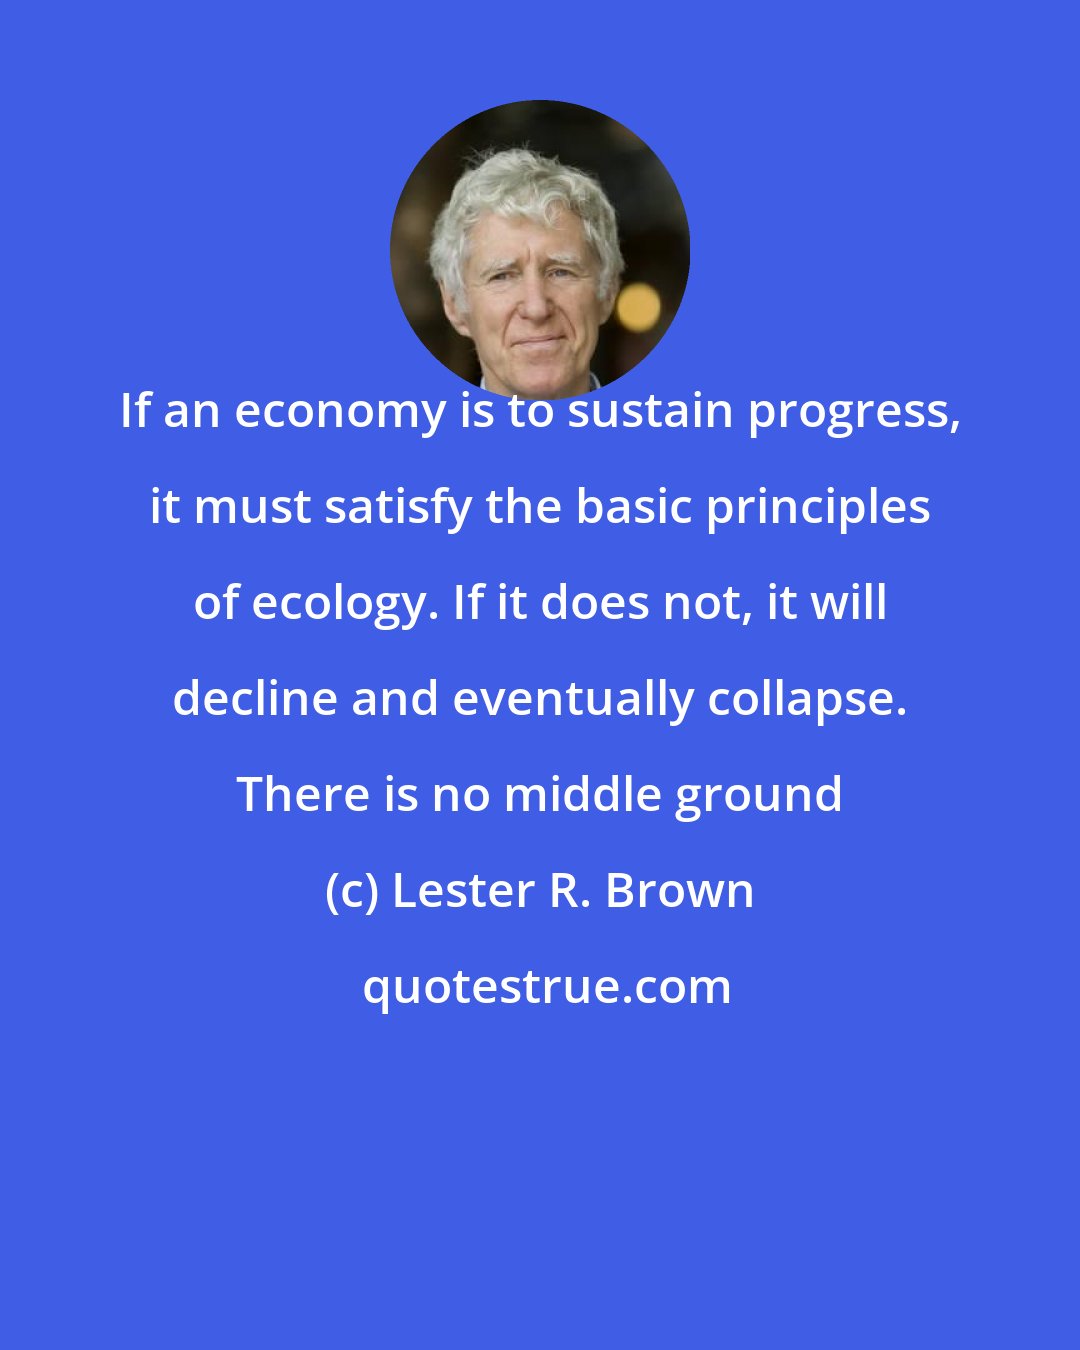 Lester R. Brown: If an economy is to sustain progress, it must satisfy the basic principles of ecology. If it does not, it will decline and eventually collapse. There is no middle ground